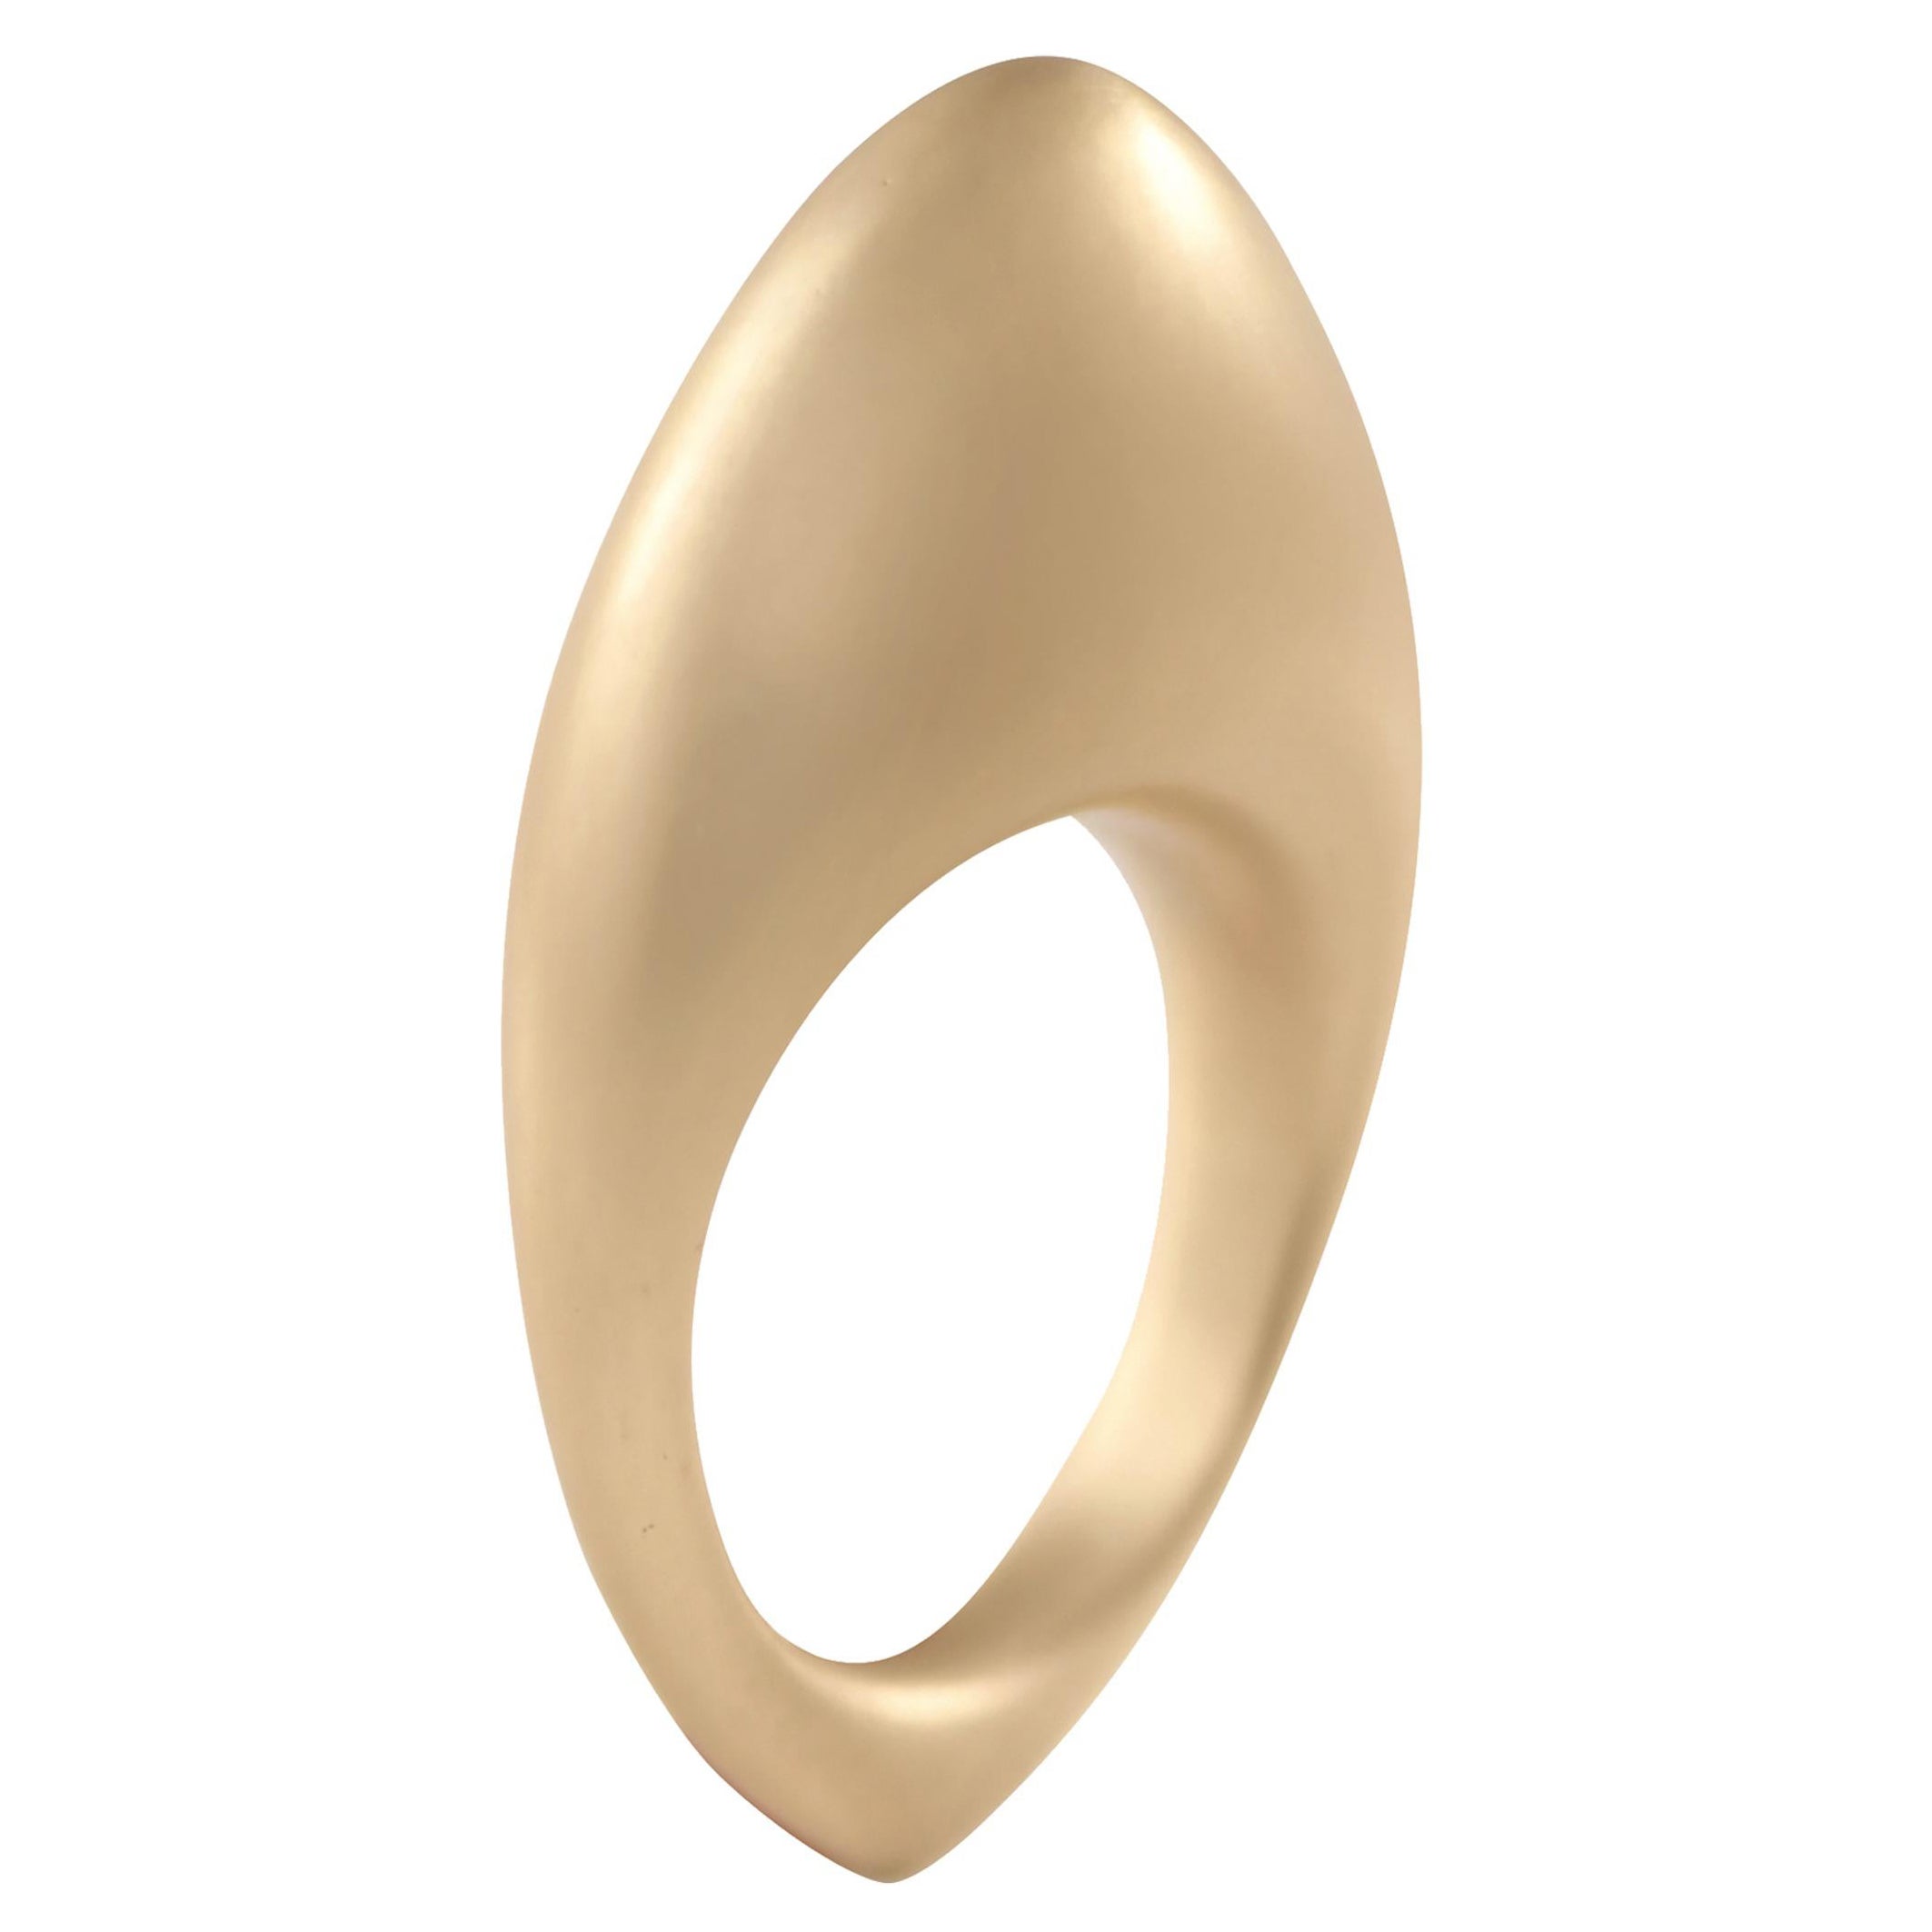 Nada Ghazal's One-of-a-kind and Handmade 18k Yellow Gold Fuse Rock Ring For Sale